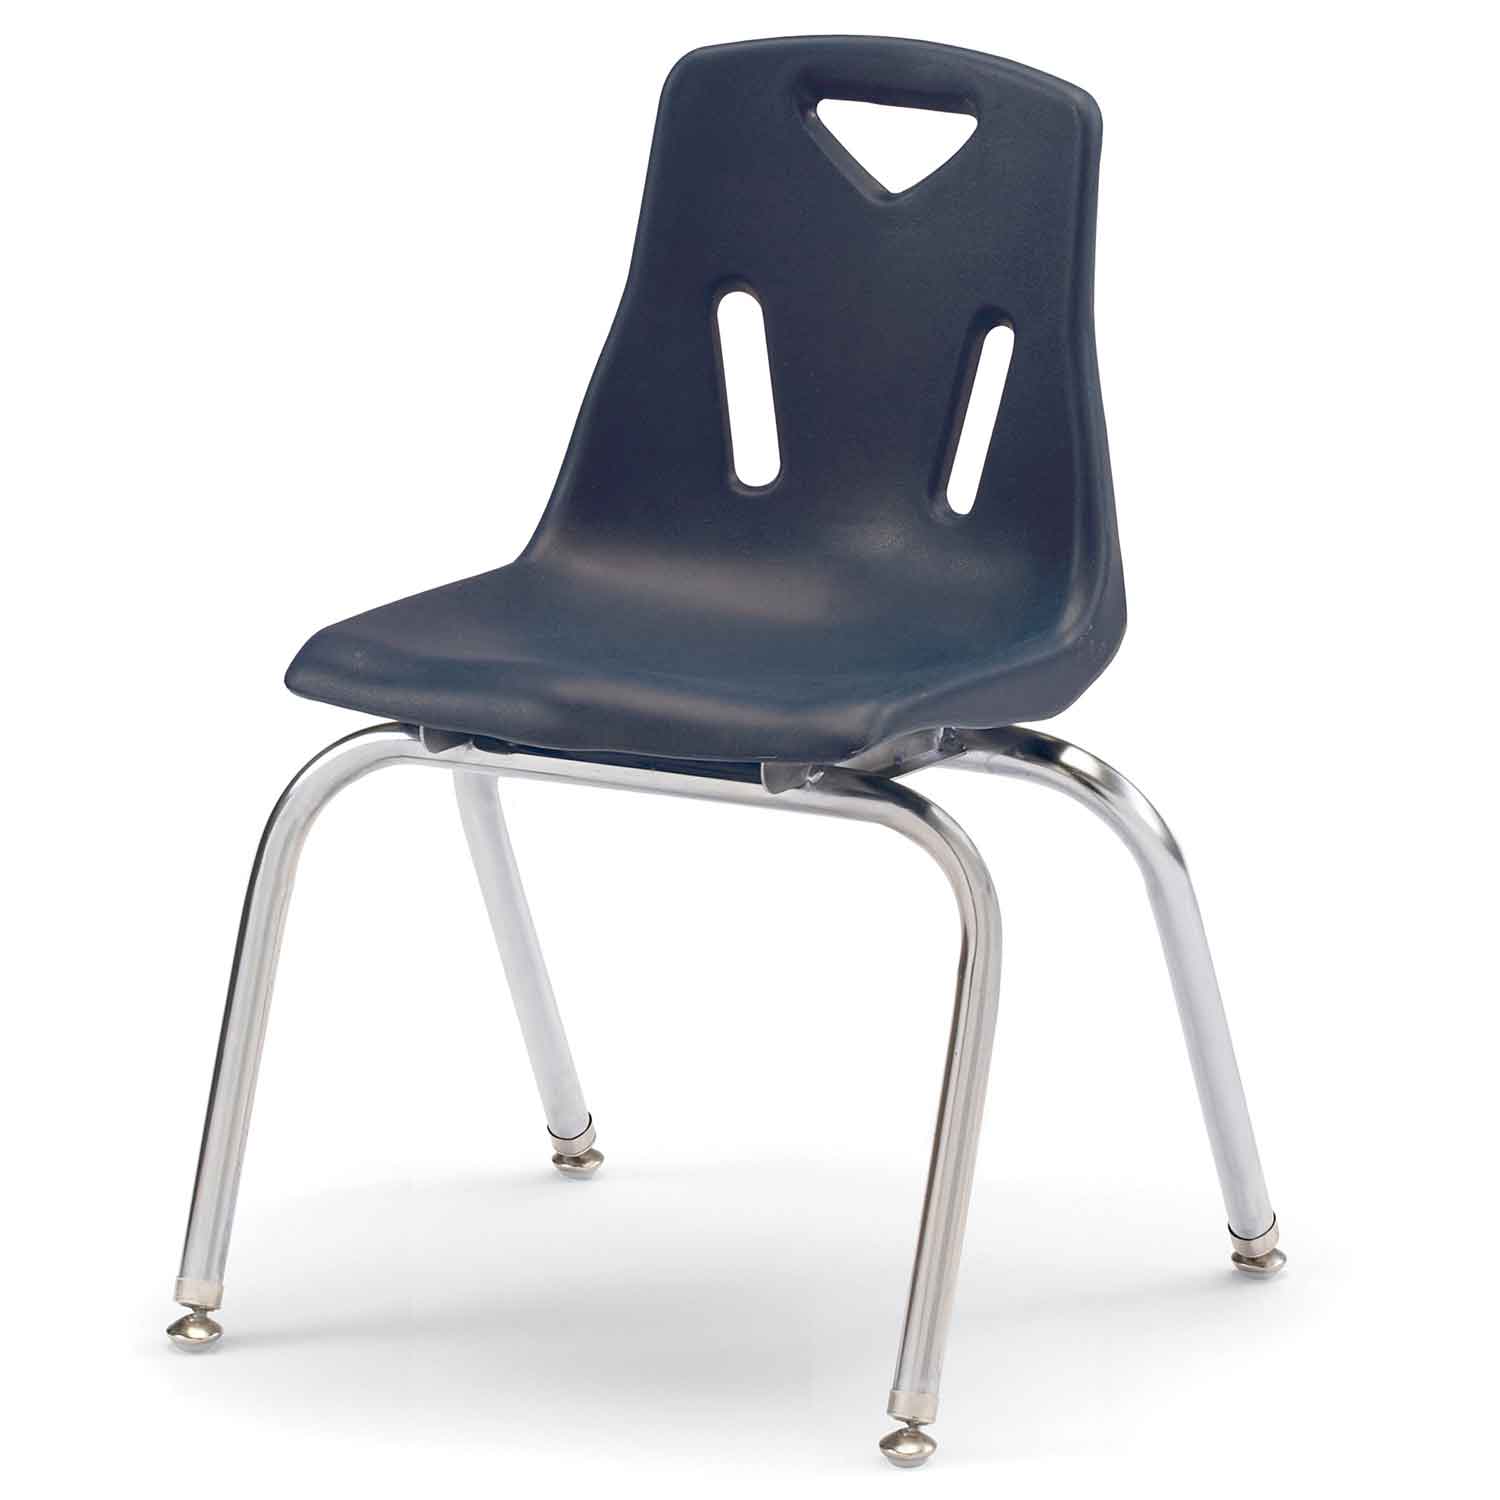 Berries® Plastic Chairs with Chrome Legs, Navy, 16"